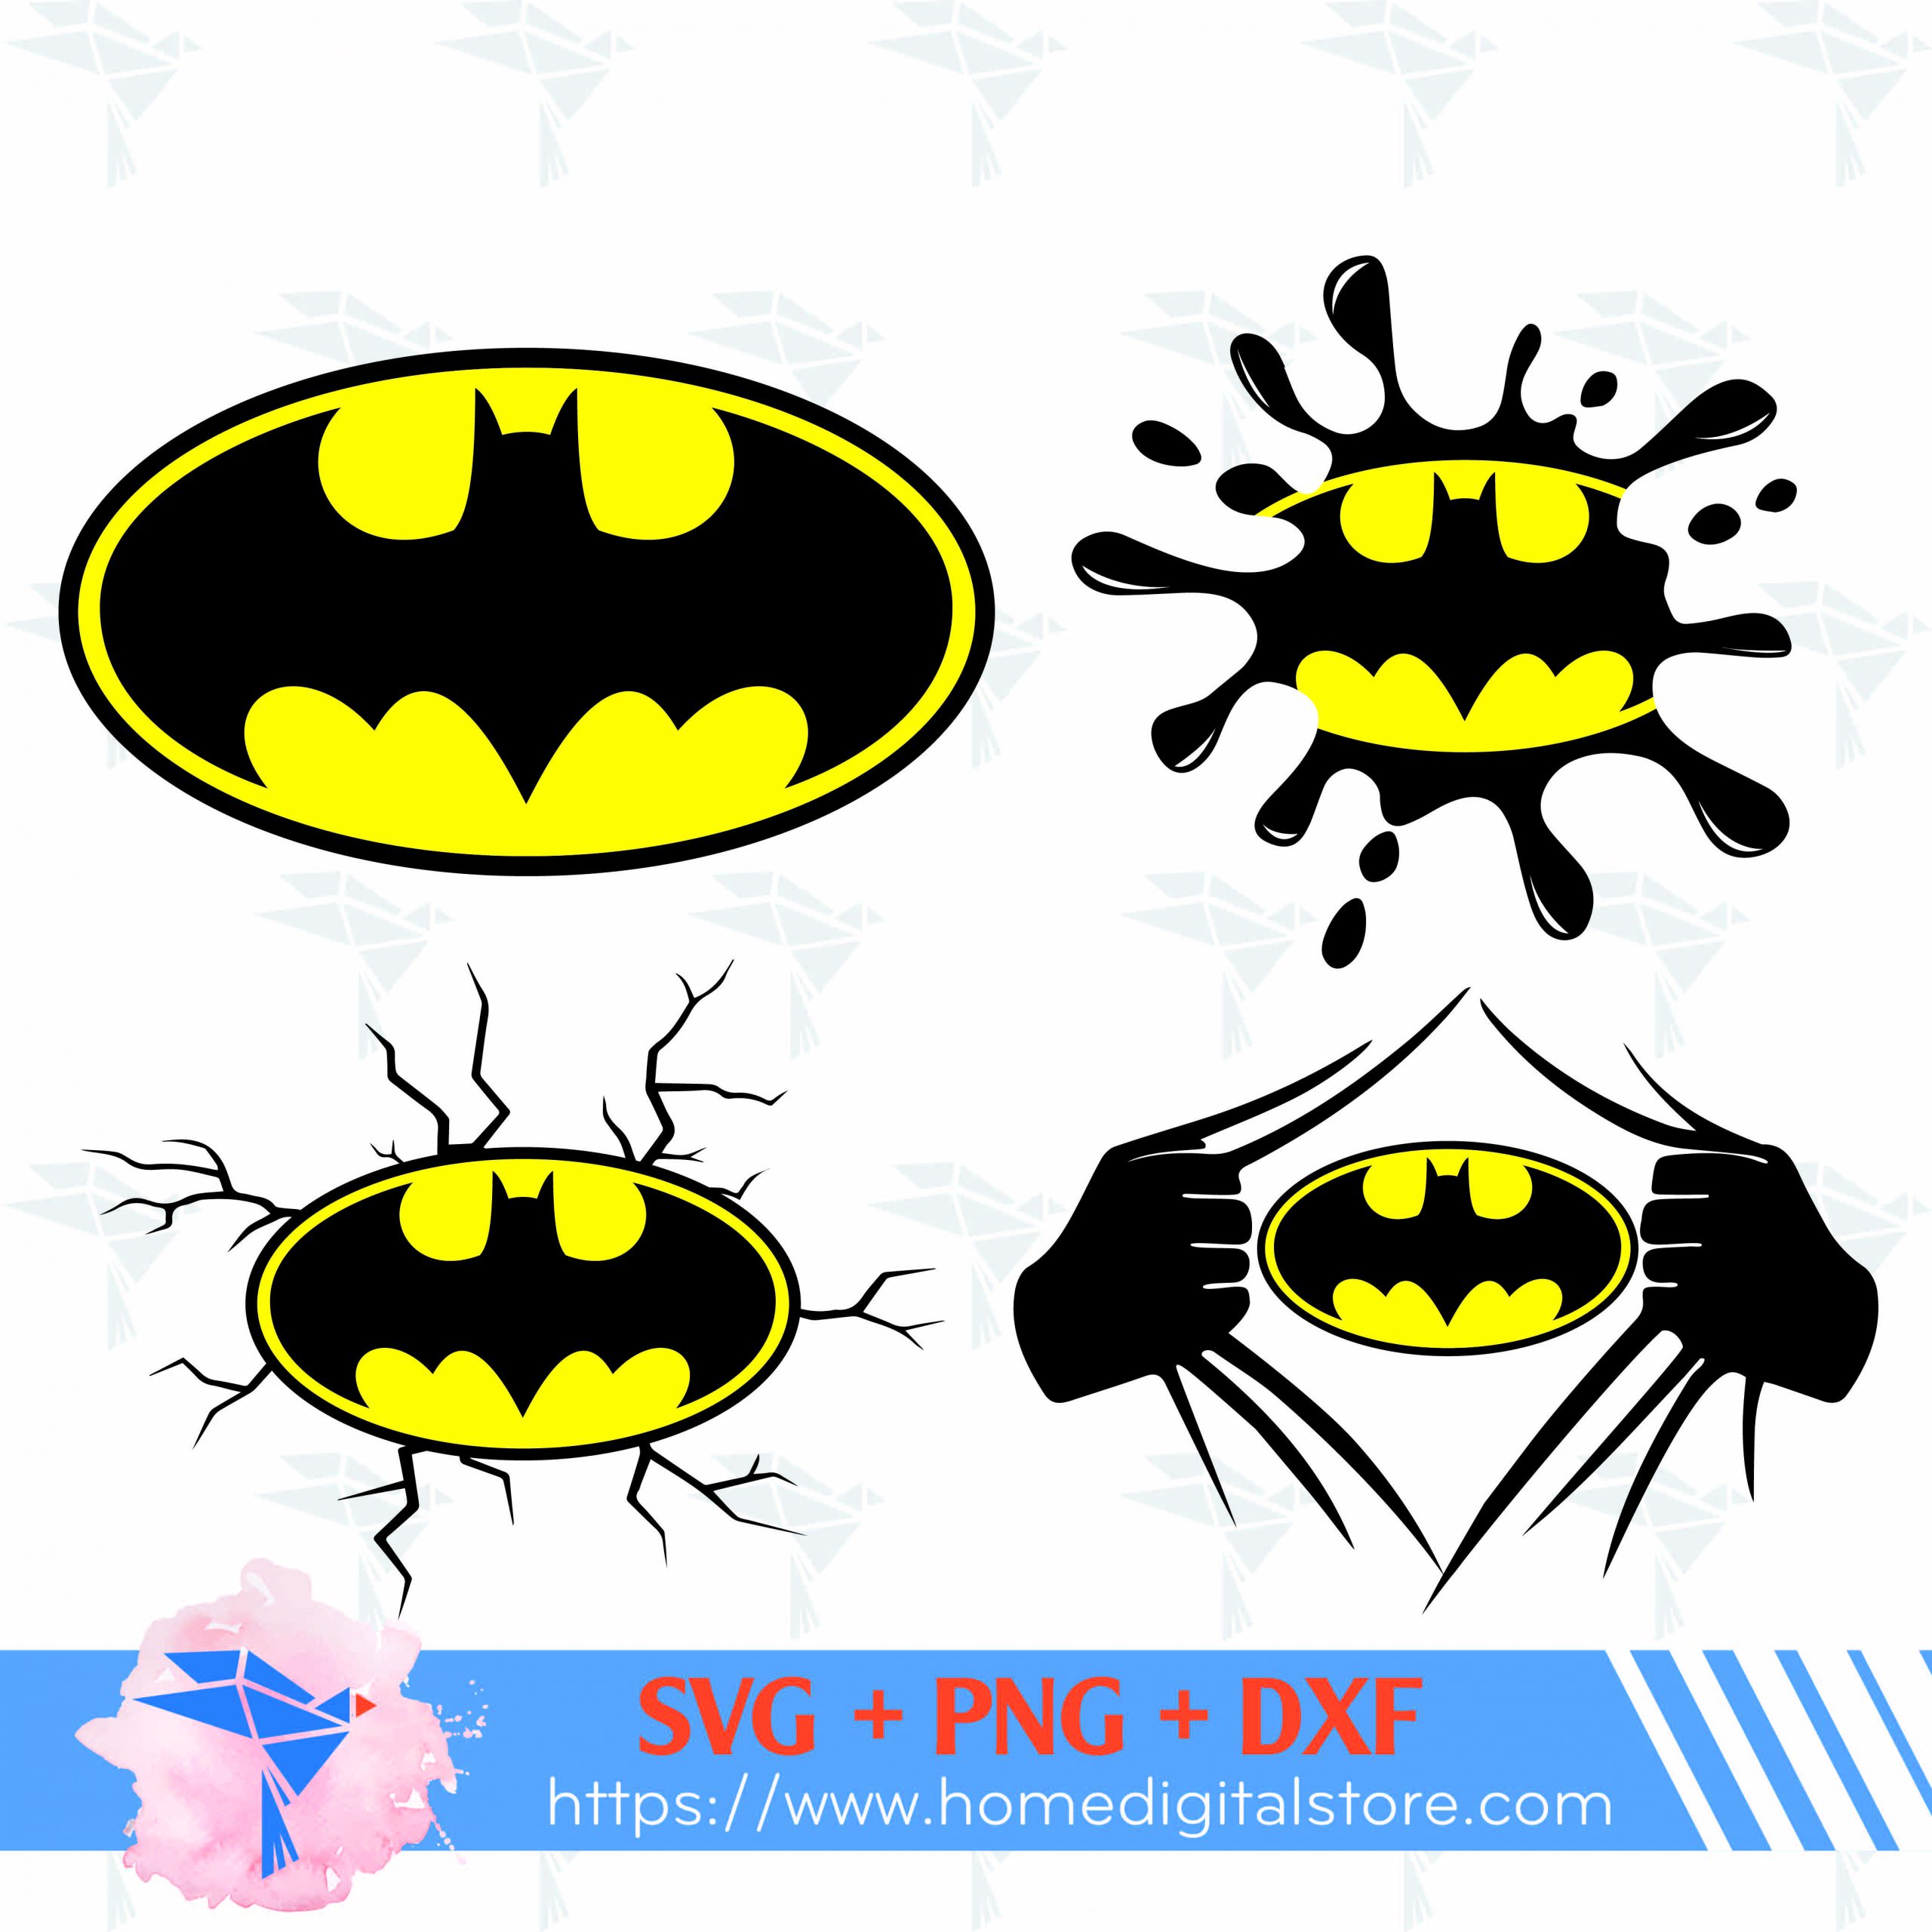 Batman Logo SVG, PNG, DXF. Instant download files for Cricut Design Space,  Silhouette, Cutting, Printing, or more